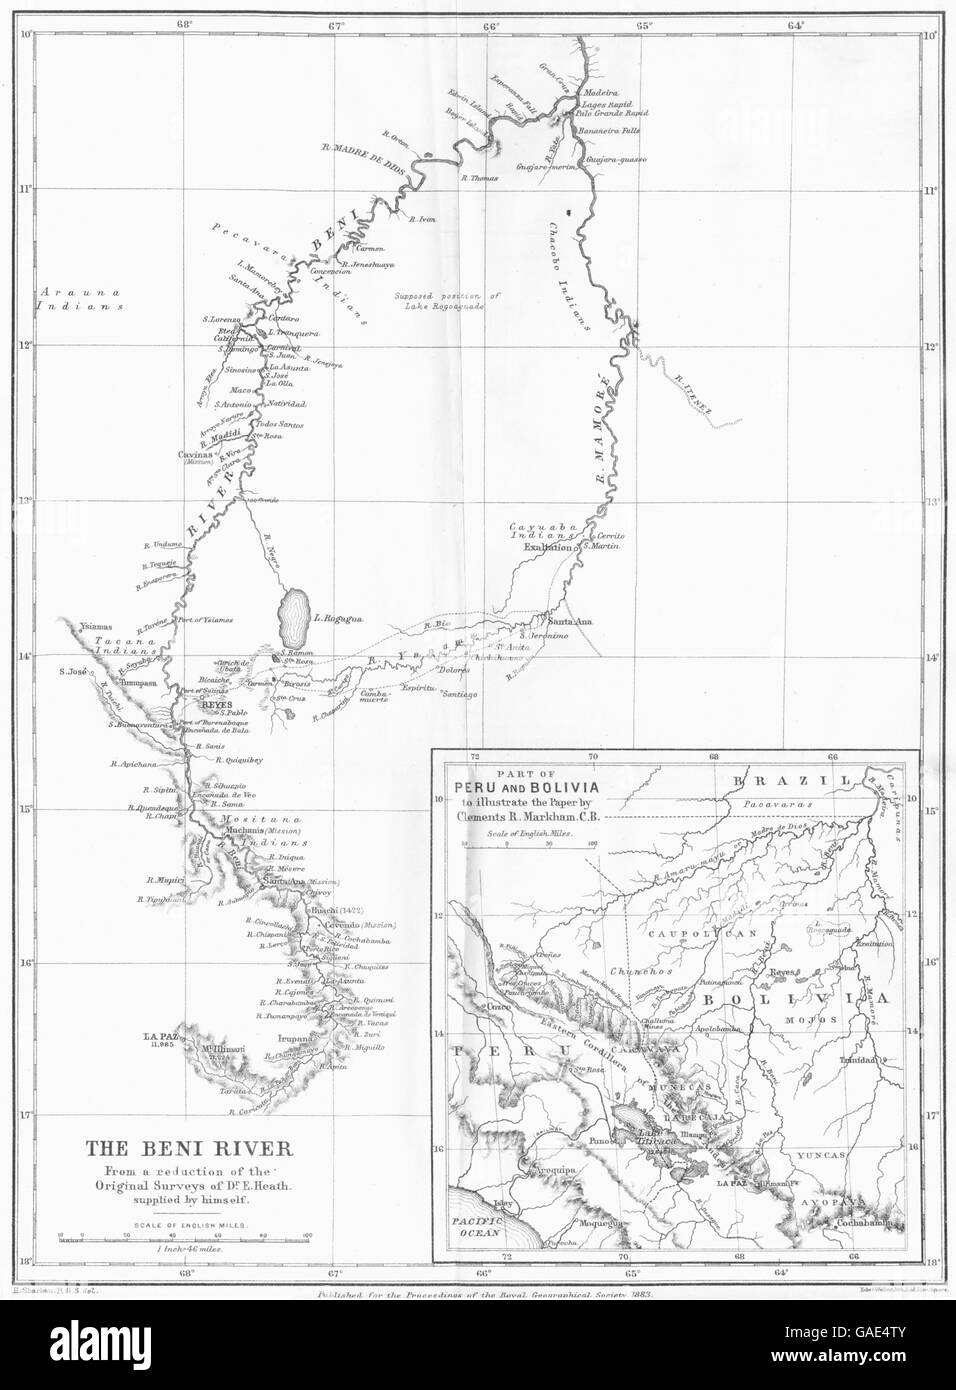 PERU: The Beni river; Inset map of Part of Peru and Bolivia. RGS map, 1883 Stock Photo